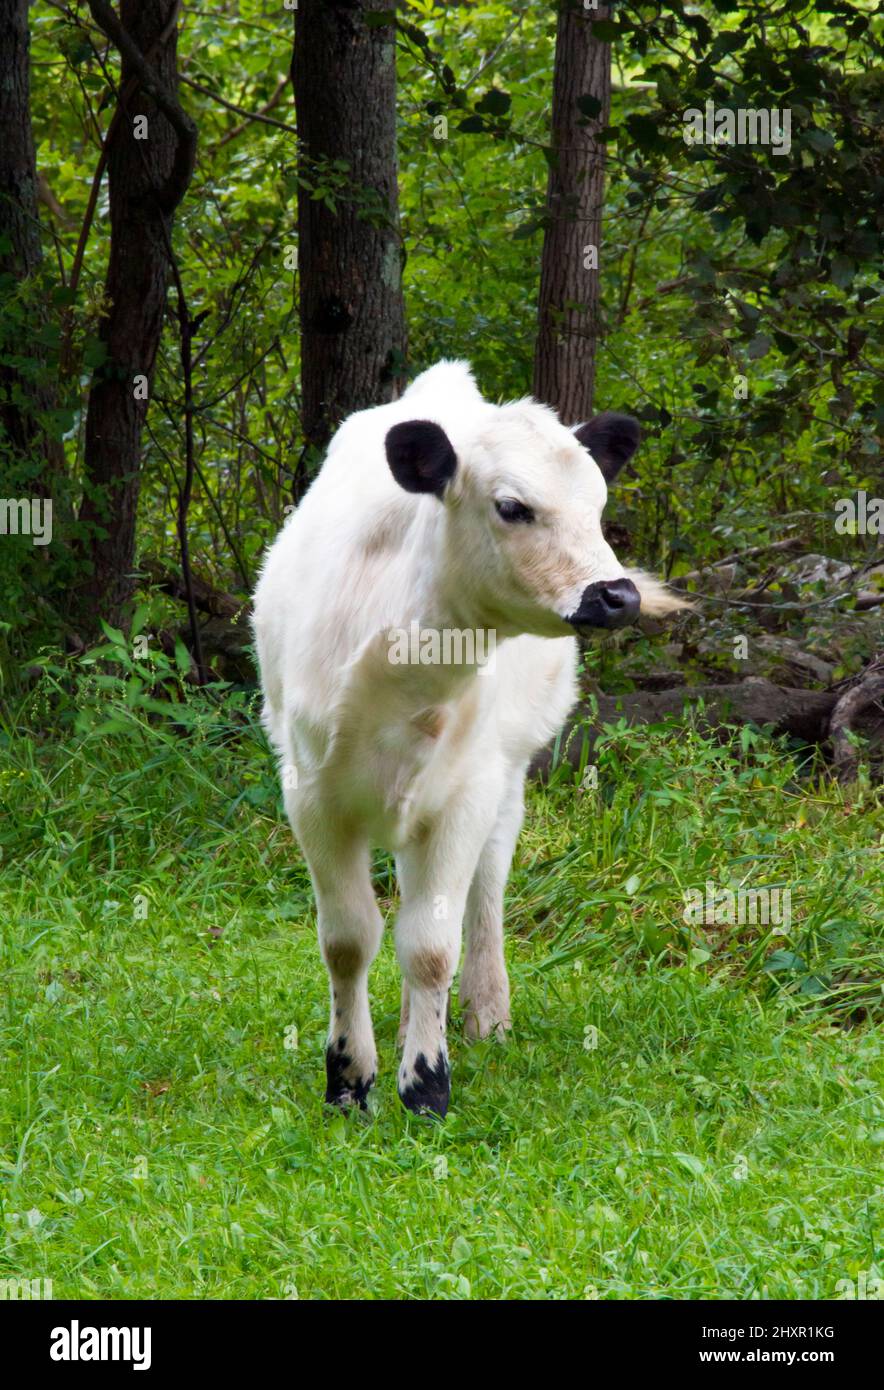 A  British White Cattle grazing in a feild in Pennsylvania's Pocono Mountains.  This is a rare brred raised for both beef and dairy. Stock Photo